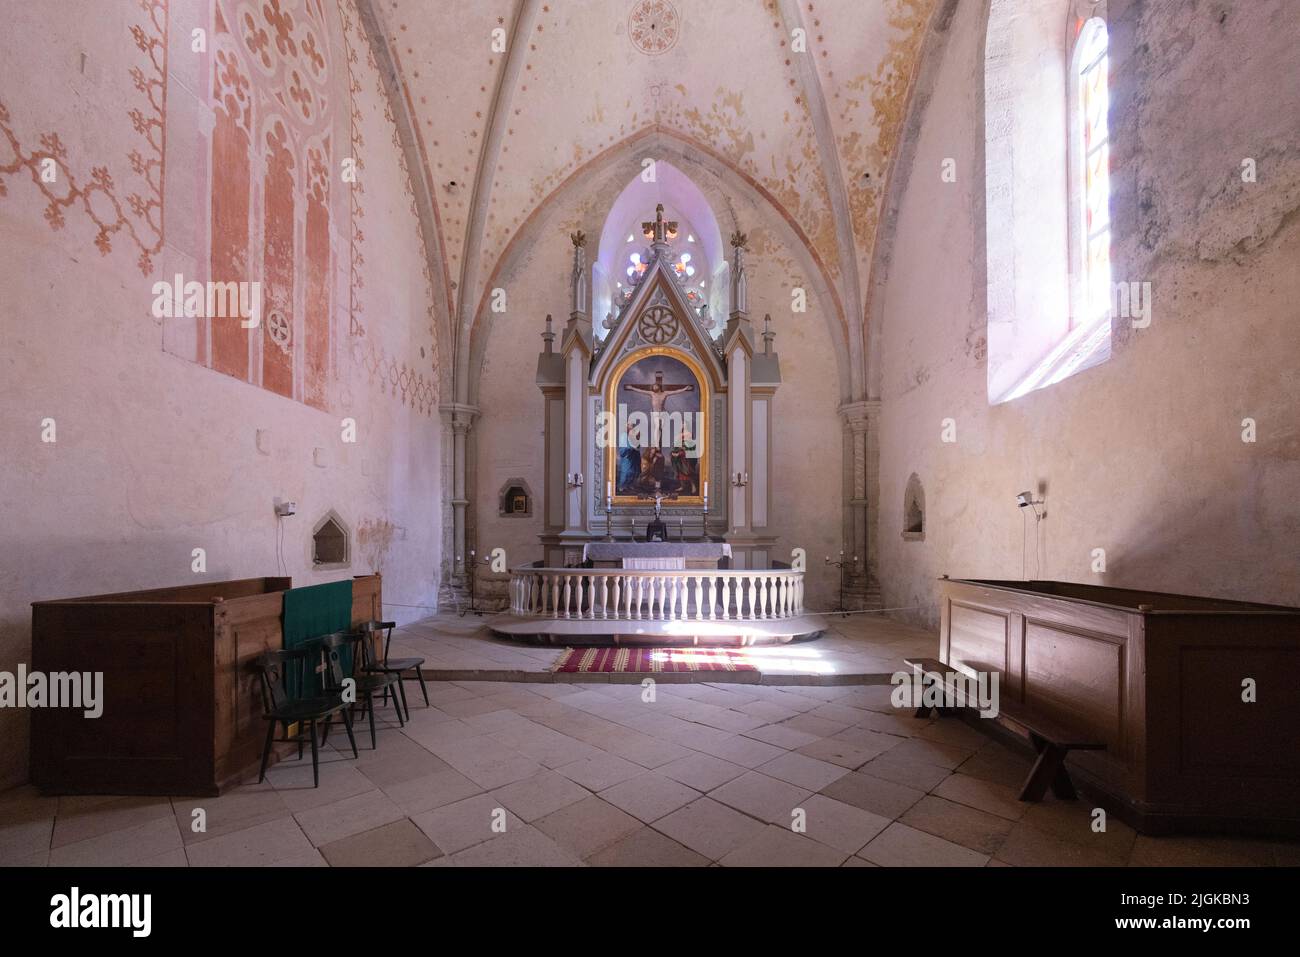 Saaremaa church; Medieval murals and medieval paintings dating from the 1400s,  Karja Church, a lutheran church, Saaremaa island, Estonia Europe Stock Photo